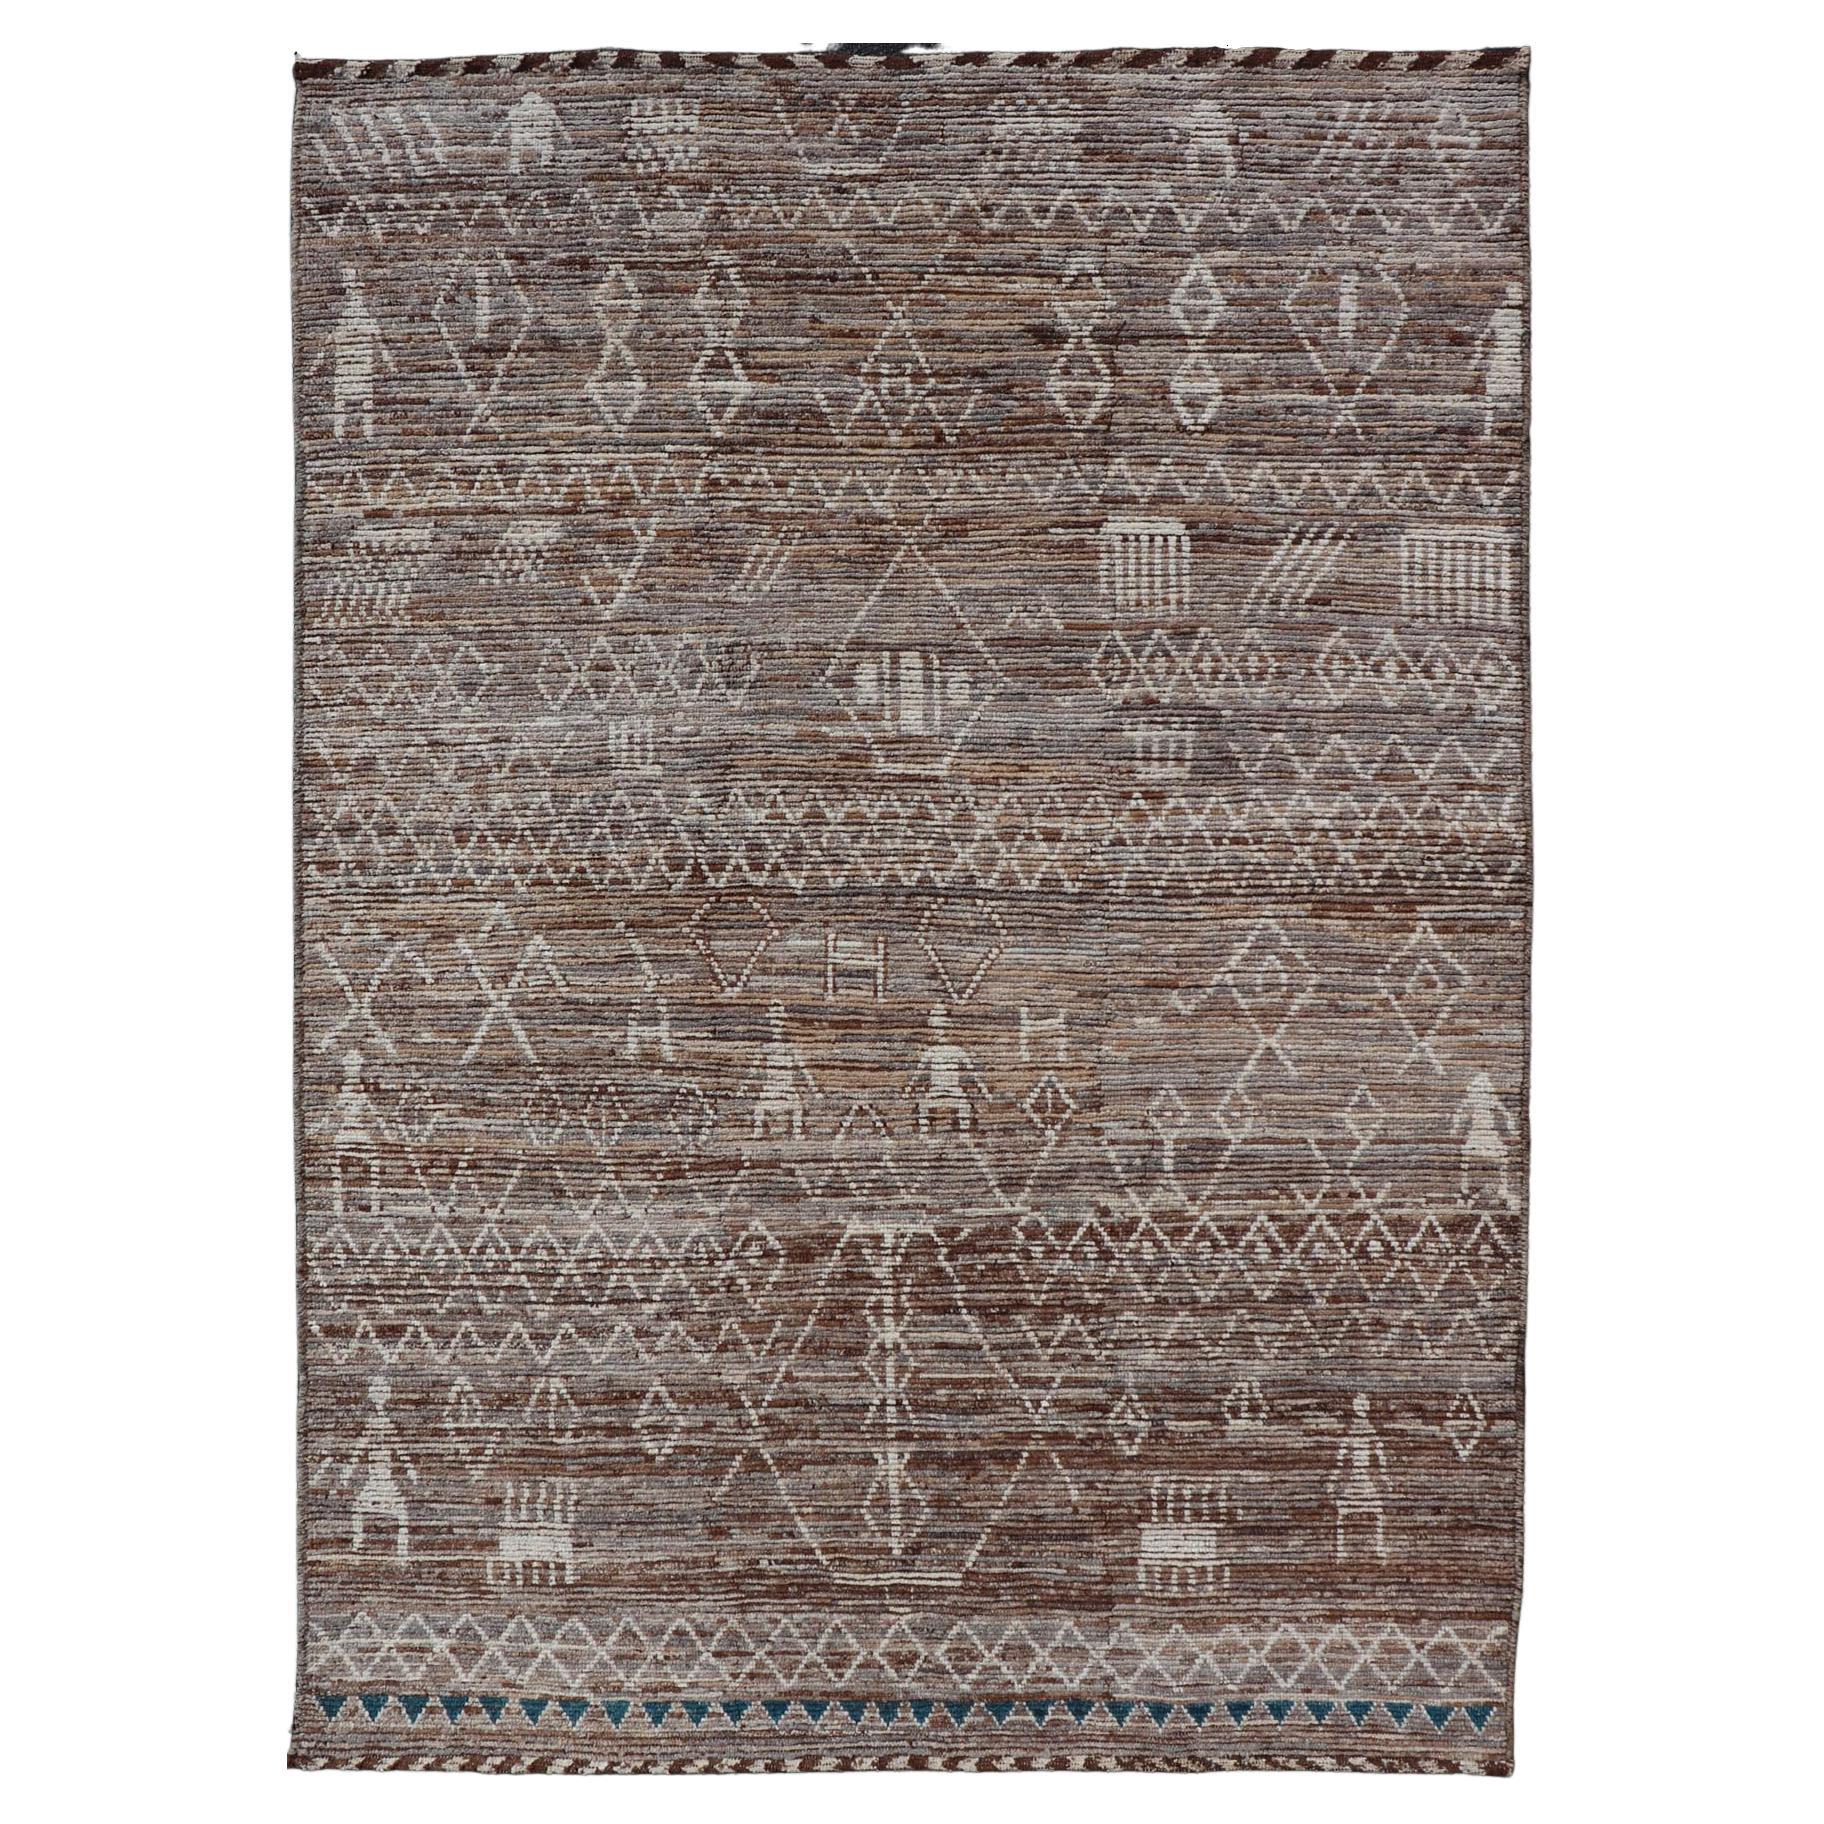 Moroccan Style Distressed Modern Rug in Diamond Design in Earthy Tones